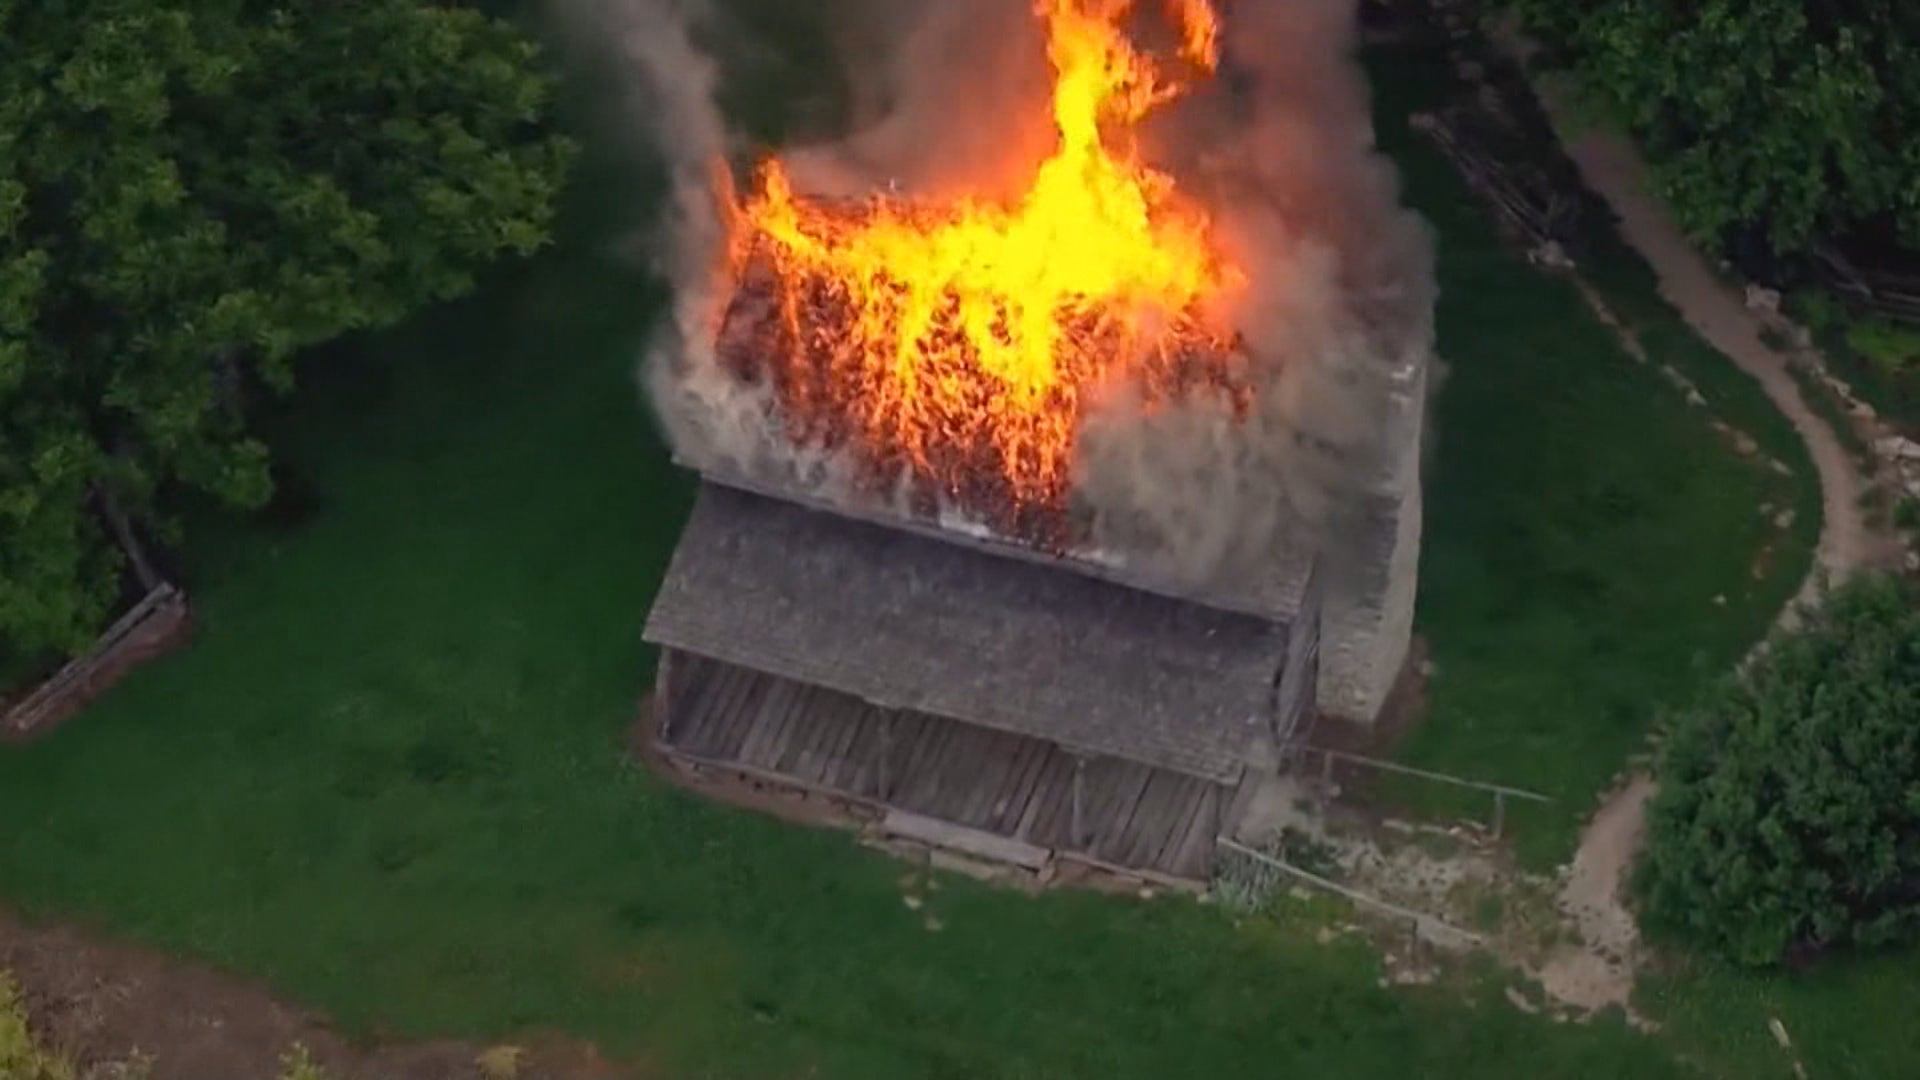 Indiana man sentenced for burning down re-creation of George Rogers Clark cabin - WISH TV Indianapolis, IN